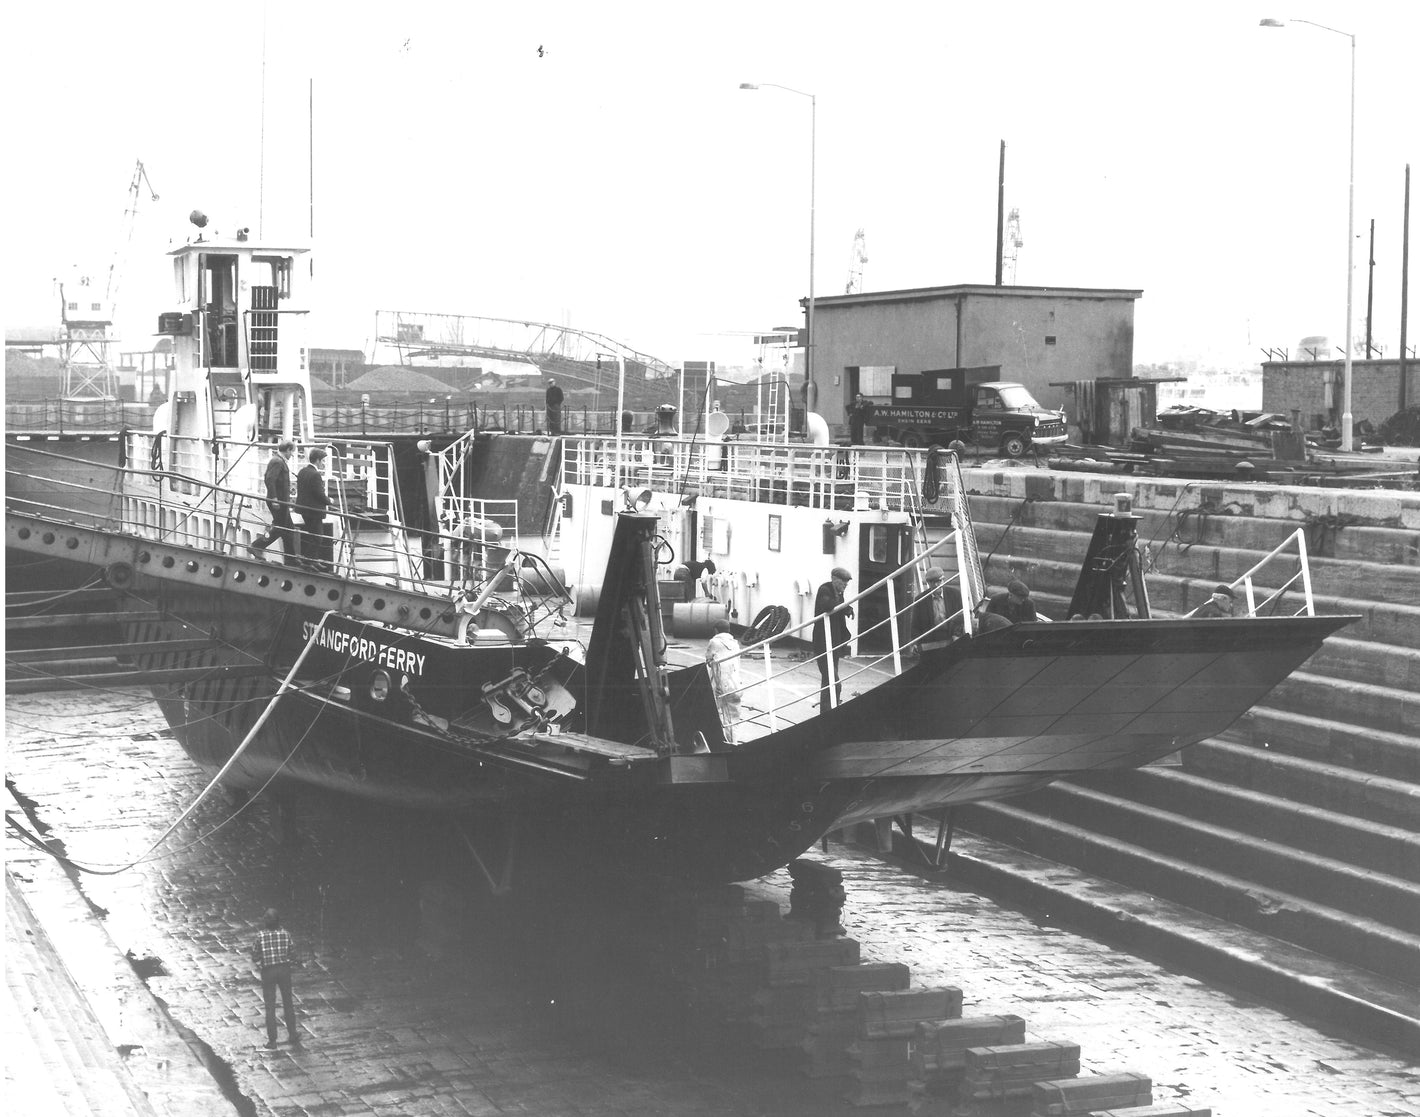 Works are carried out on one of the Strangford ferries in the dry dock